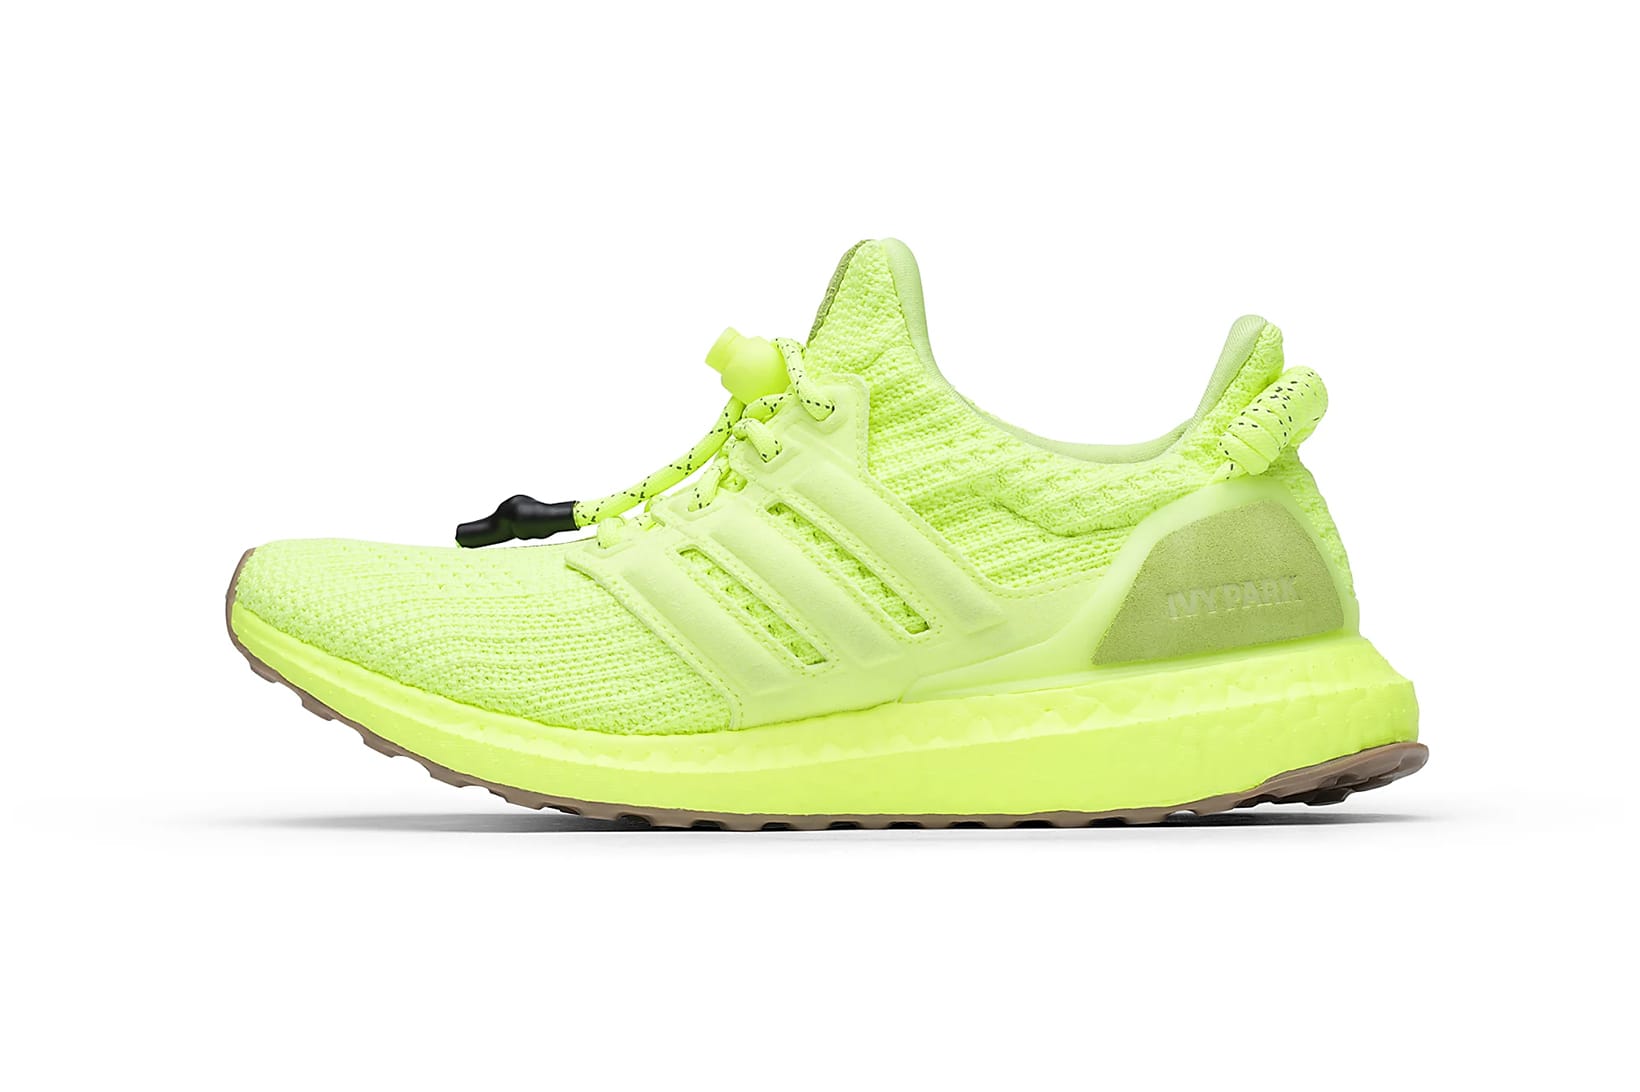 adidas shoes lime green online